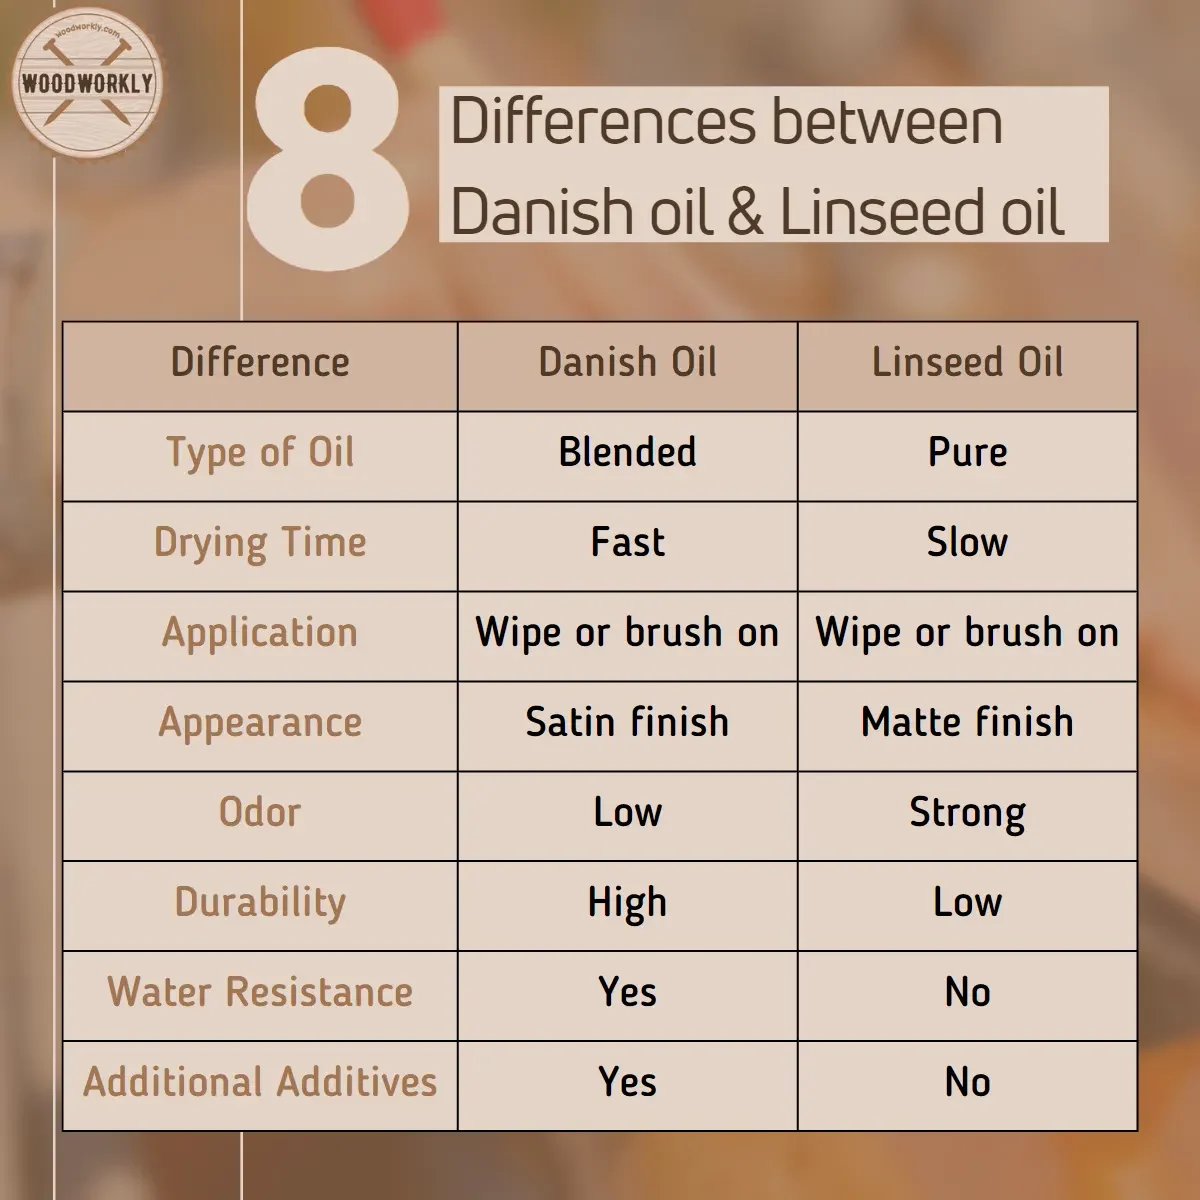 Differences between Danish oil and Linseed oil